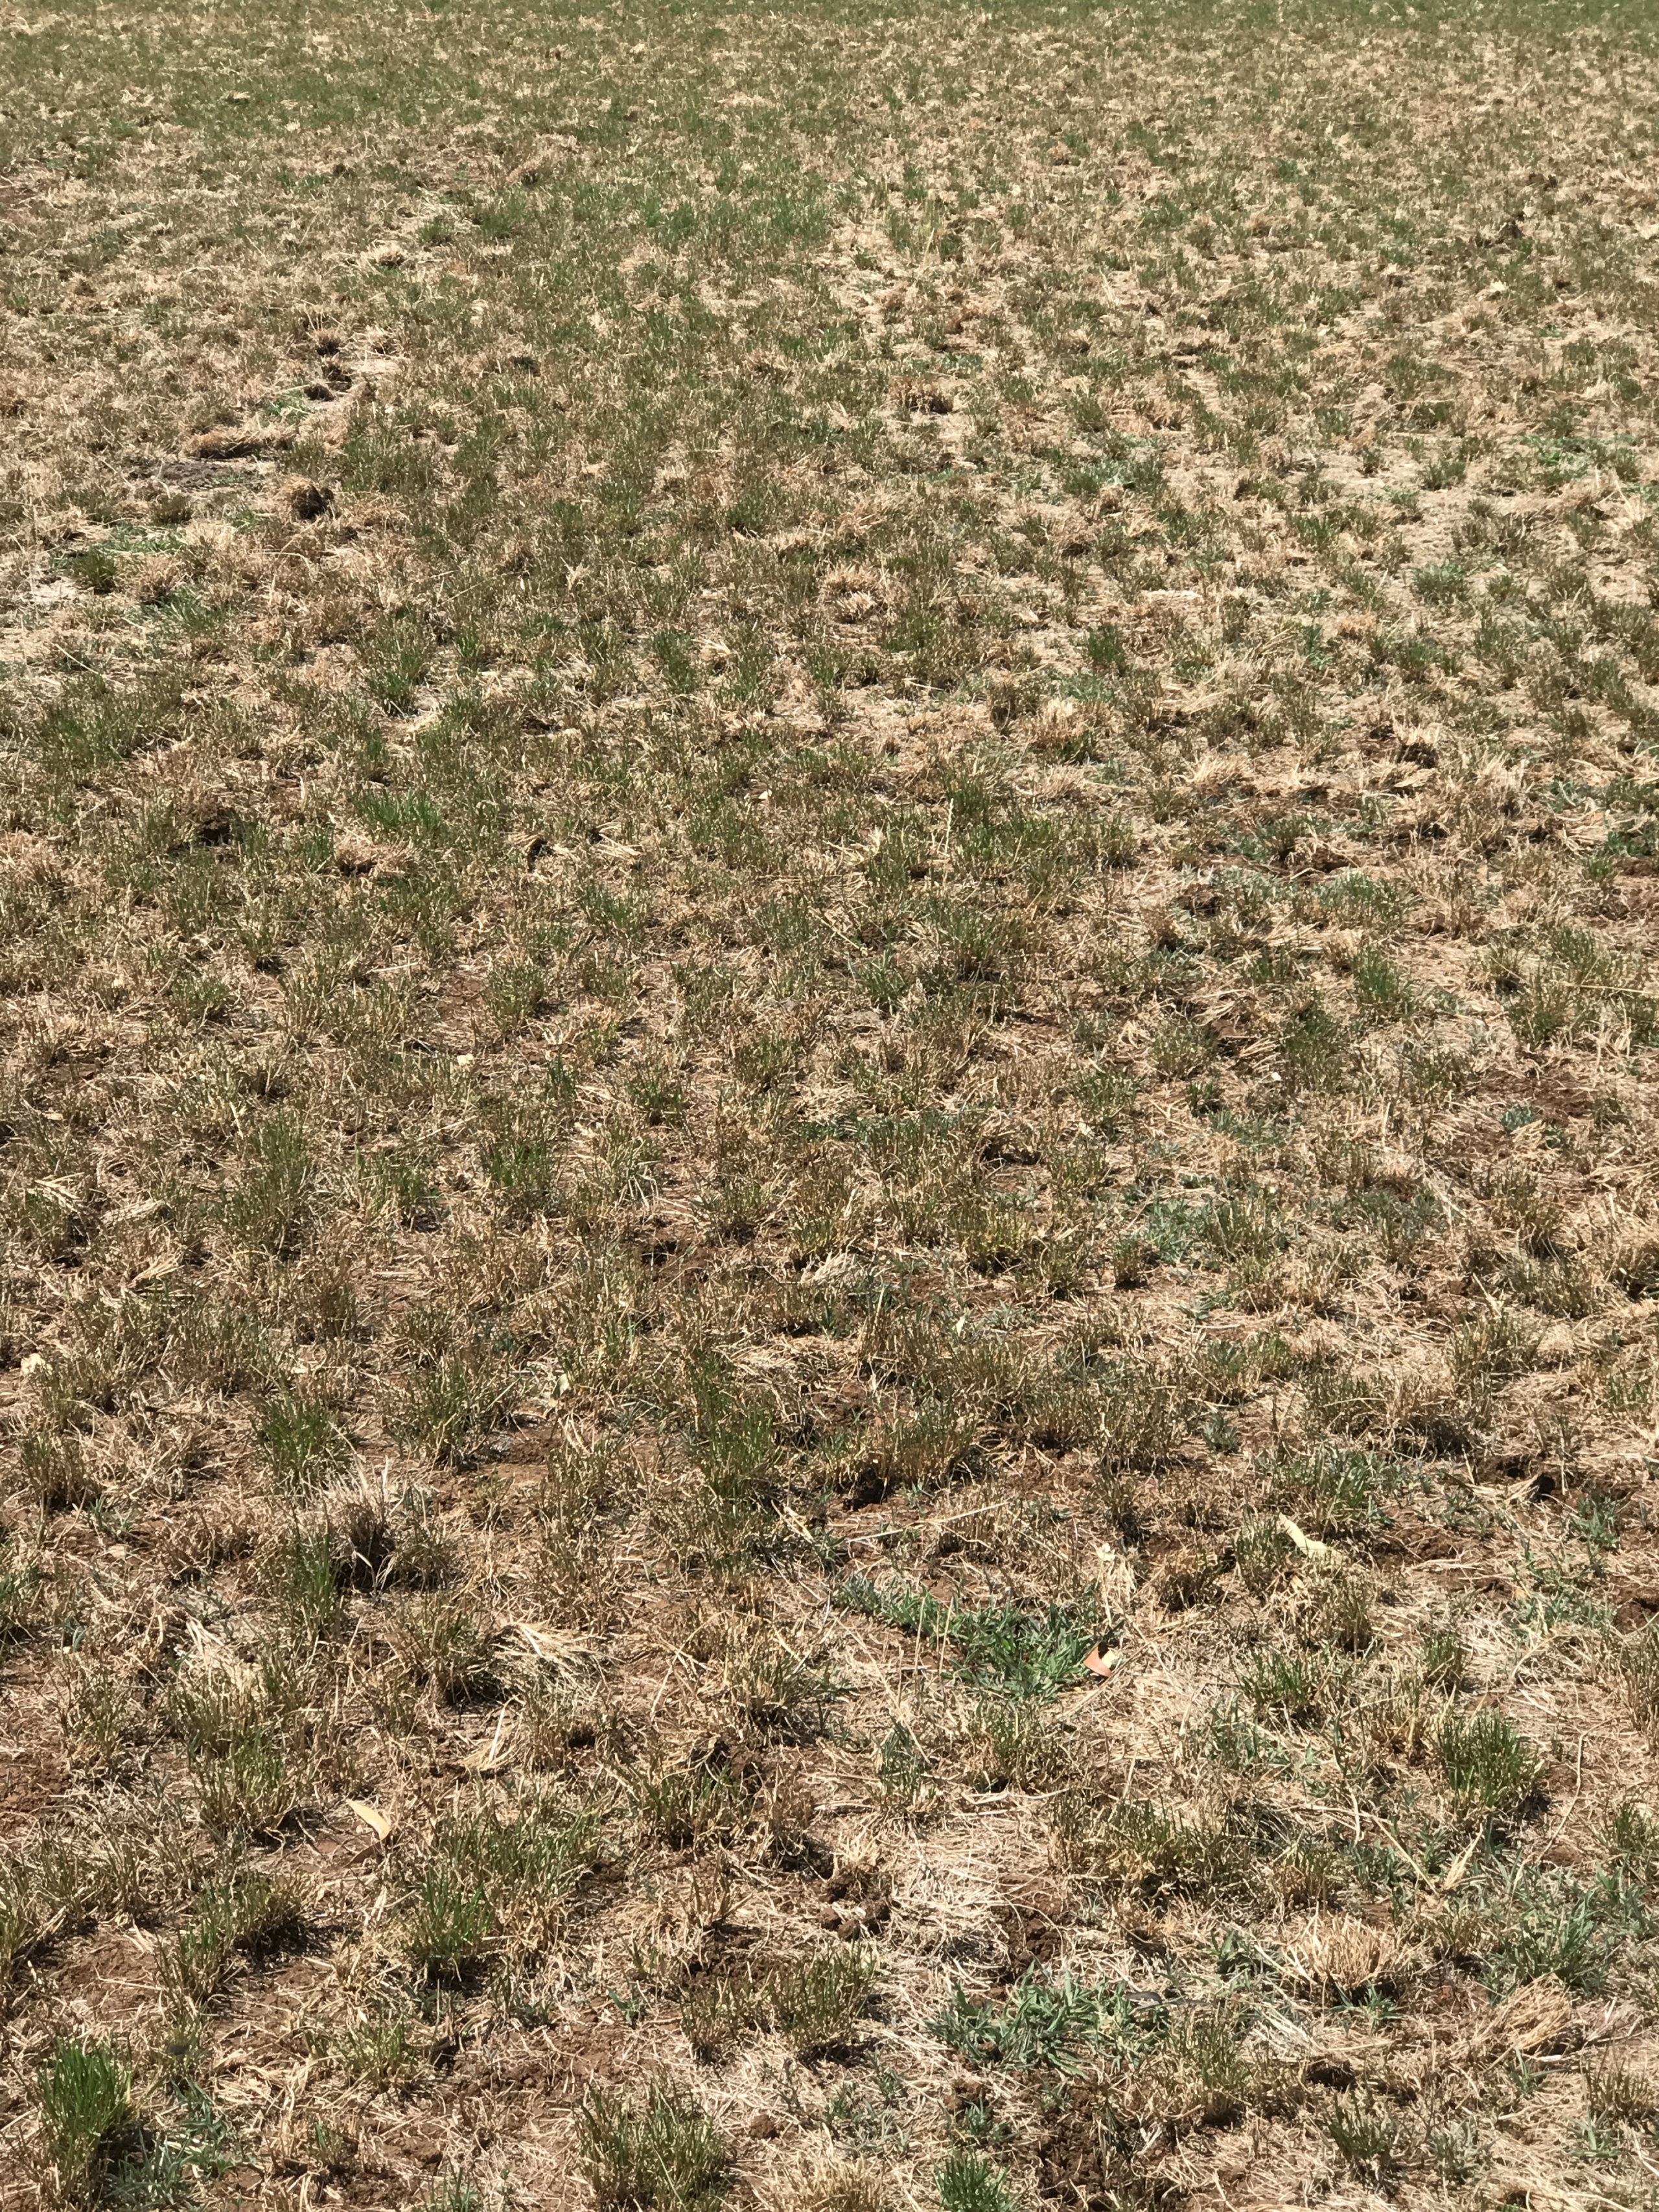 weed control in lucerne and pastures guide